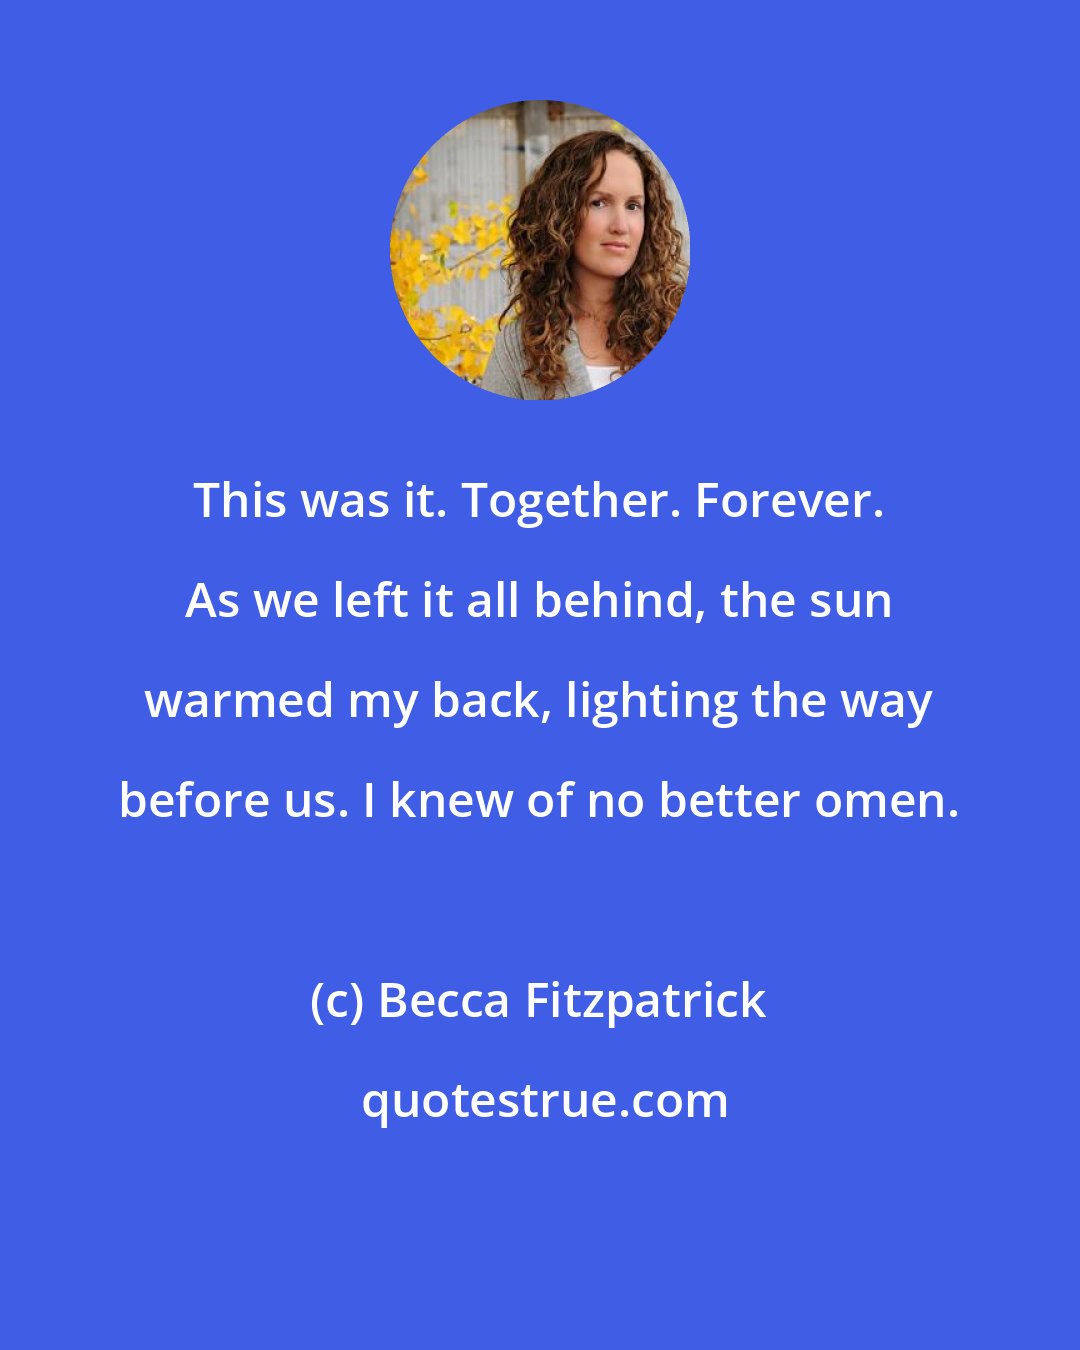 Becca Fitzpatrick: This was it. Together. Forever. As we left it all behind, the sun warmed my back, lighting the way before us. I knew of no better omen.